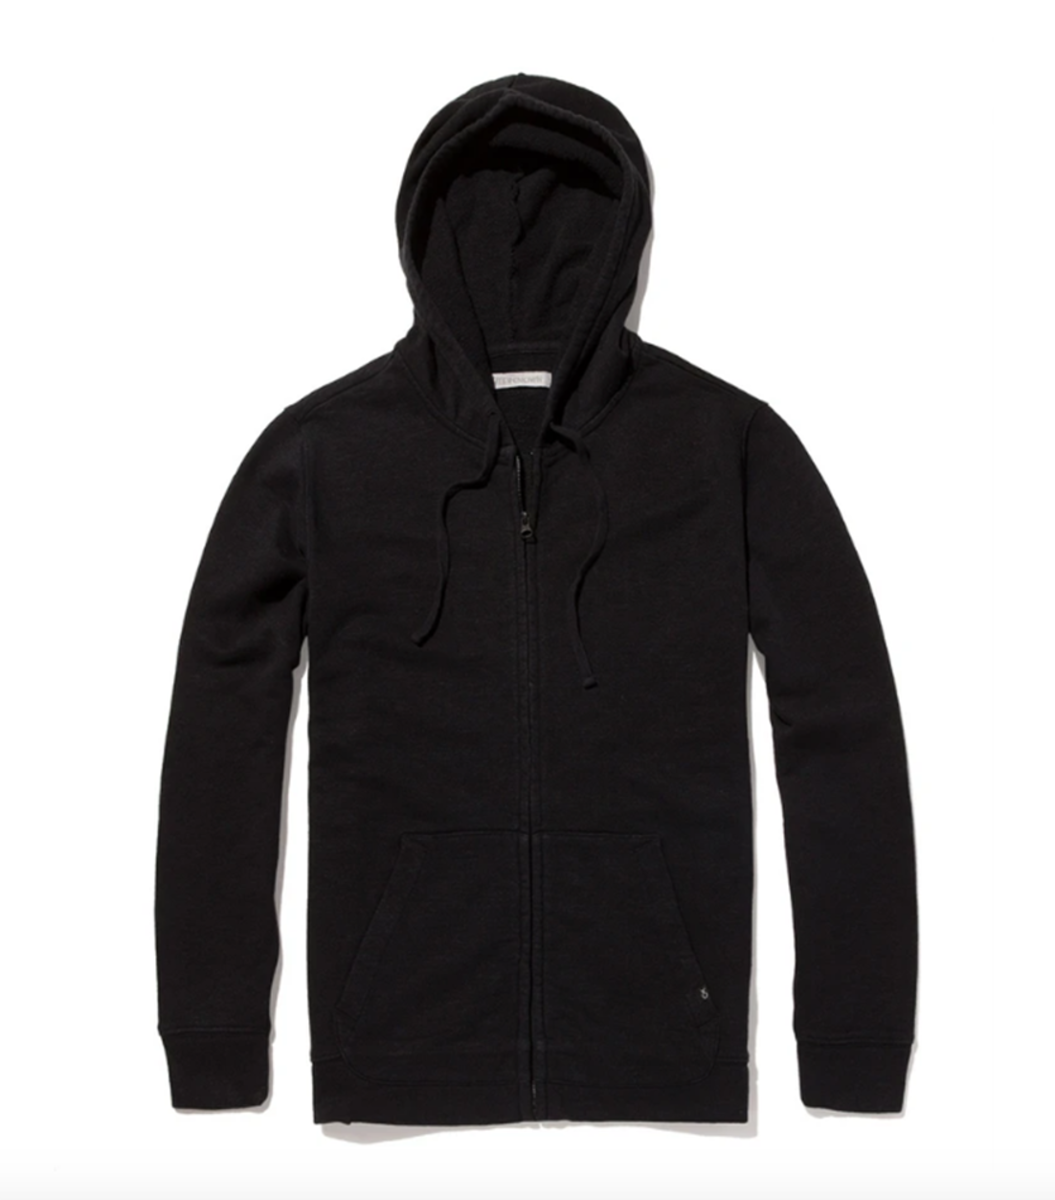 Winter Weather Stands No Chance Against This Hoodie From Outerknown ...